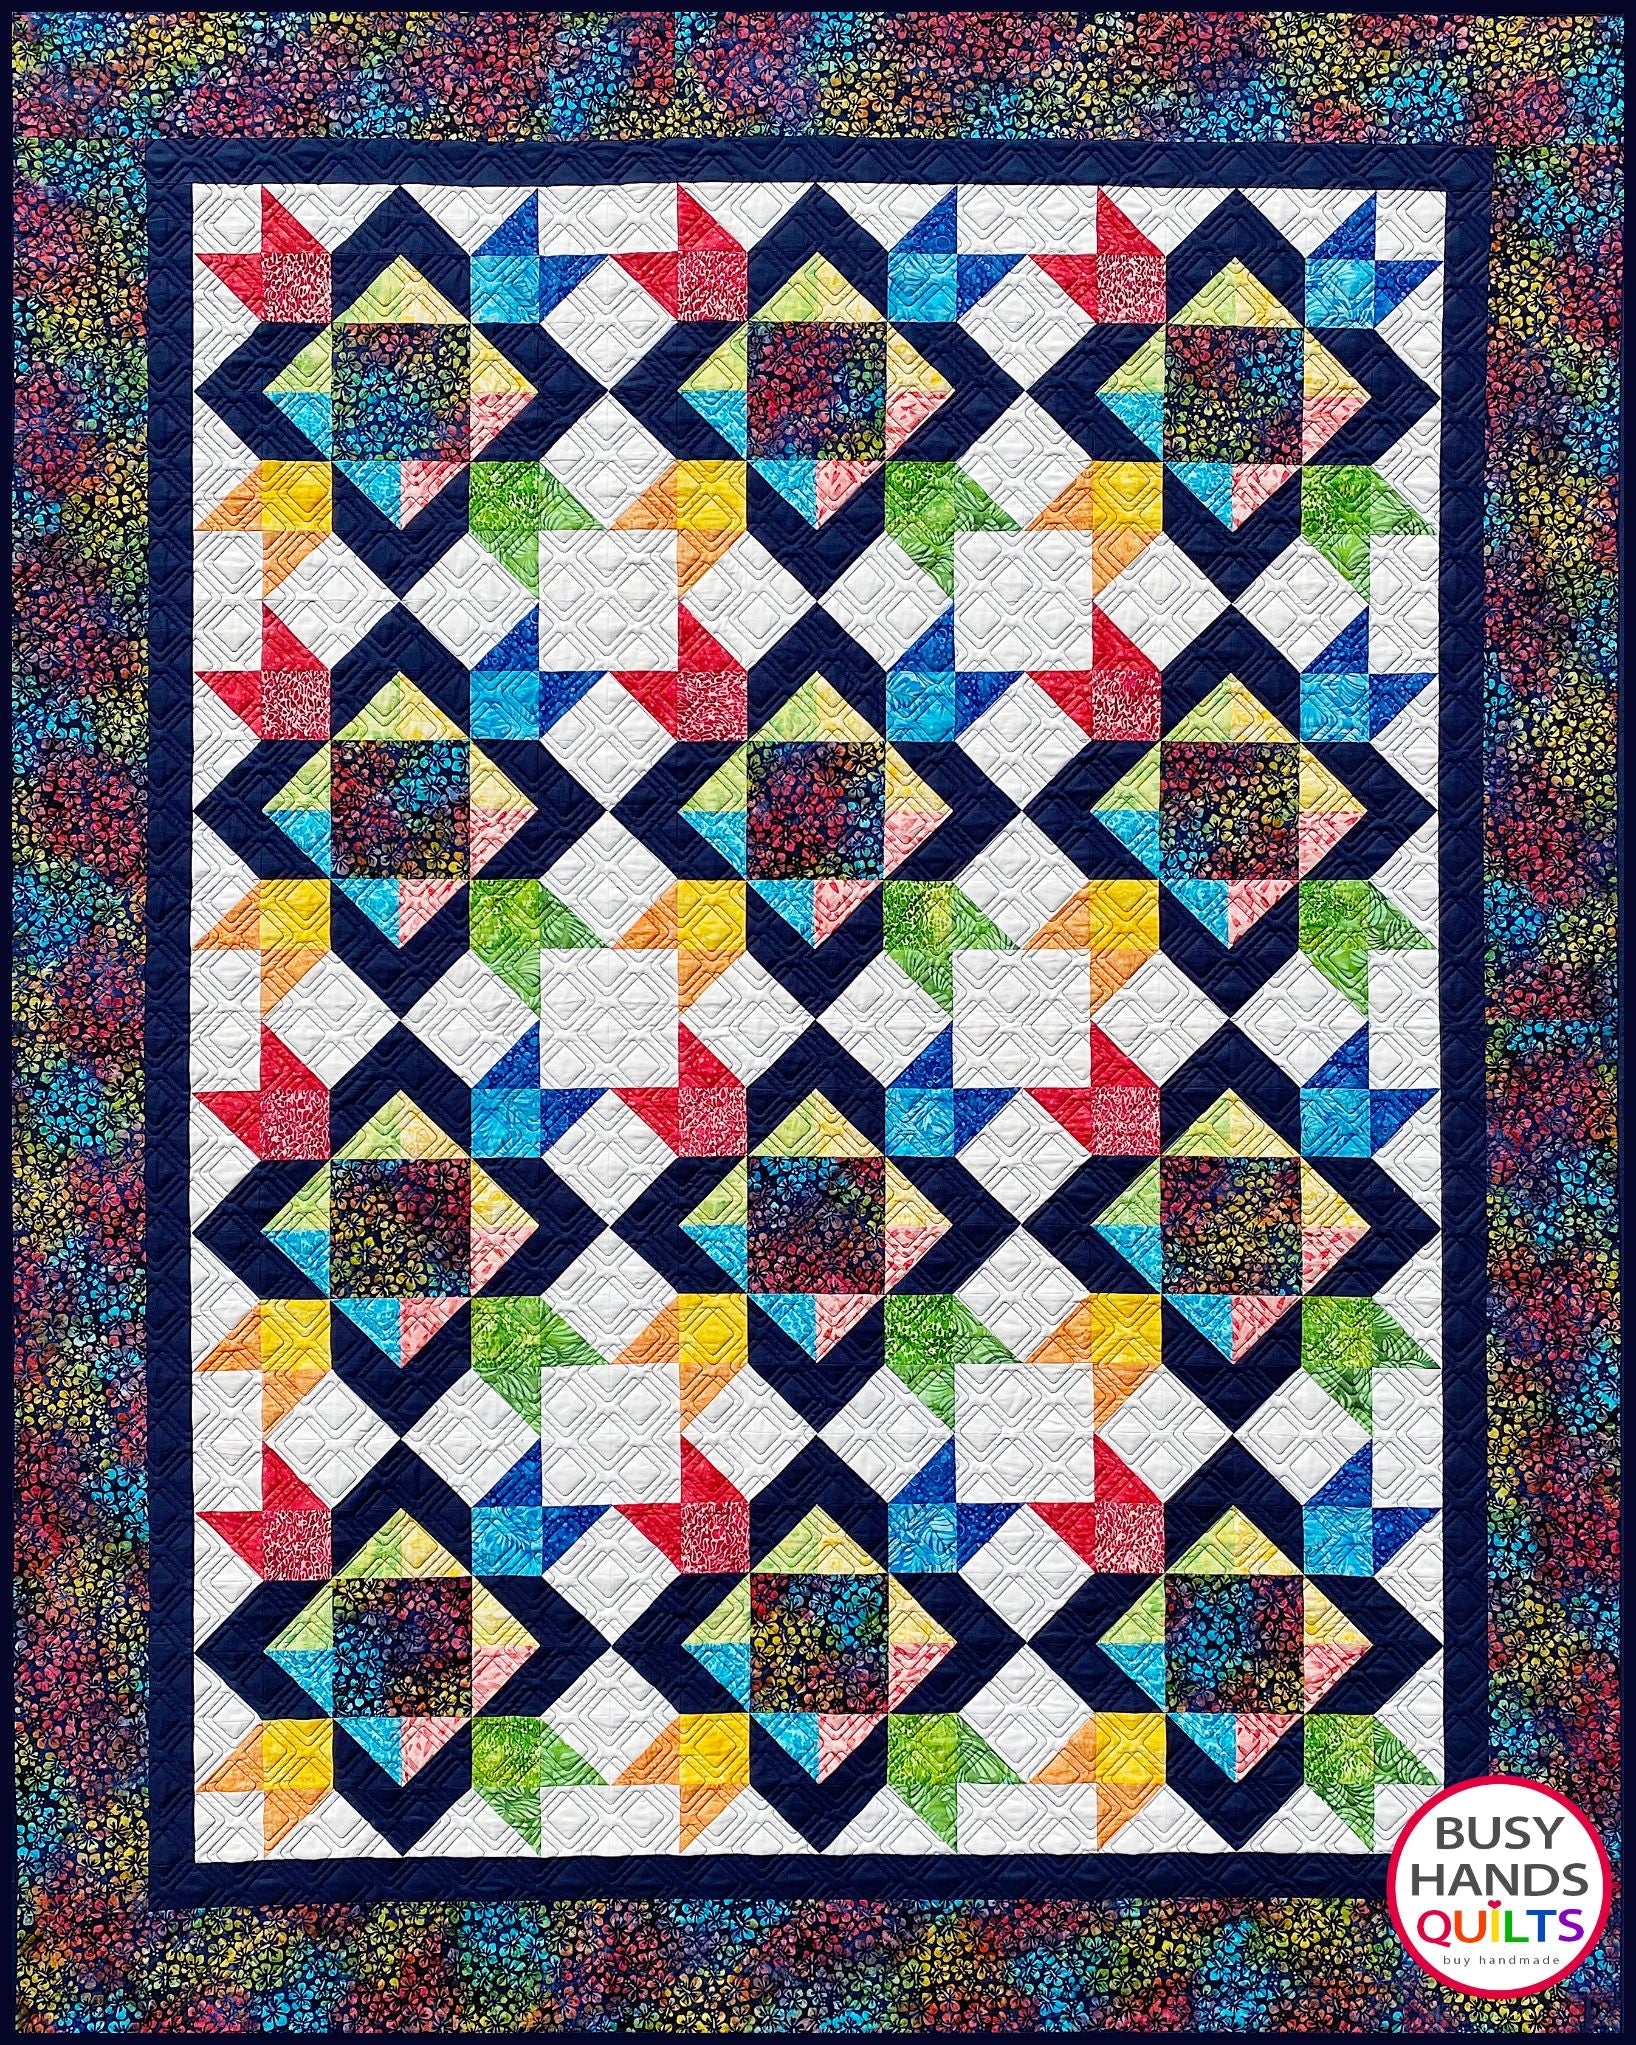 Mandalynn Quilt Pattern PDF DOWNLOAD Busy Hands Quilts $12.99